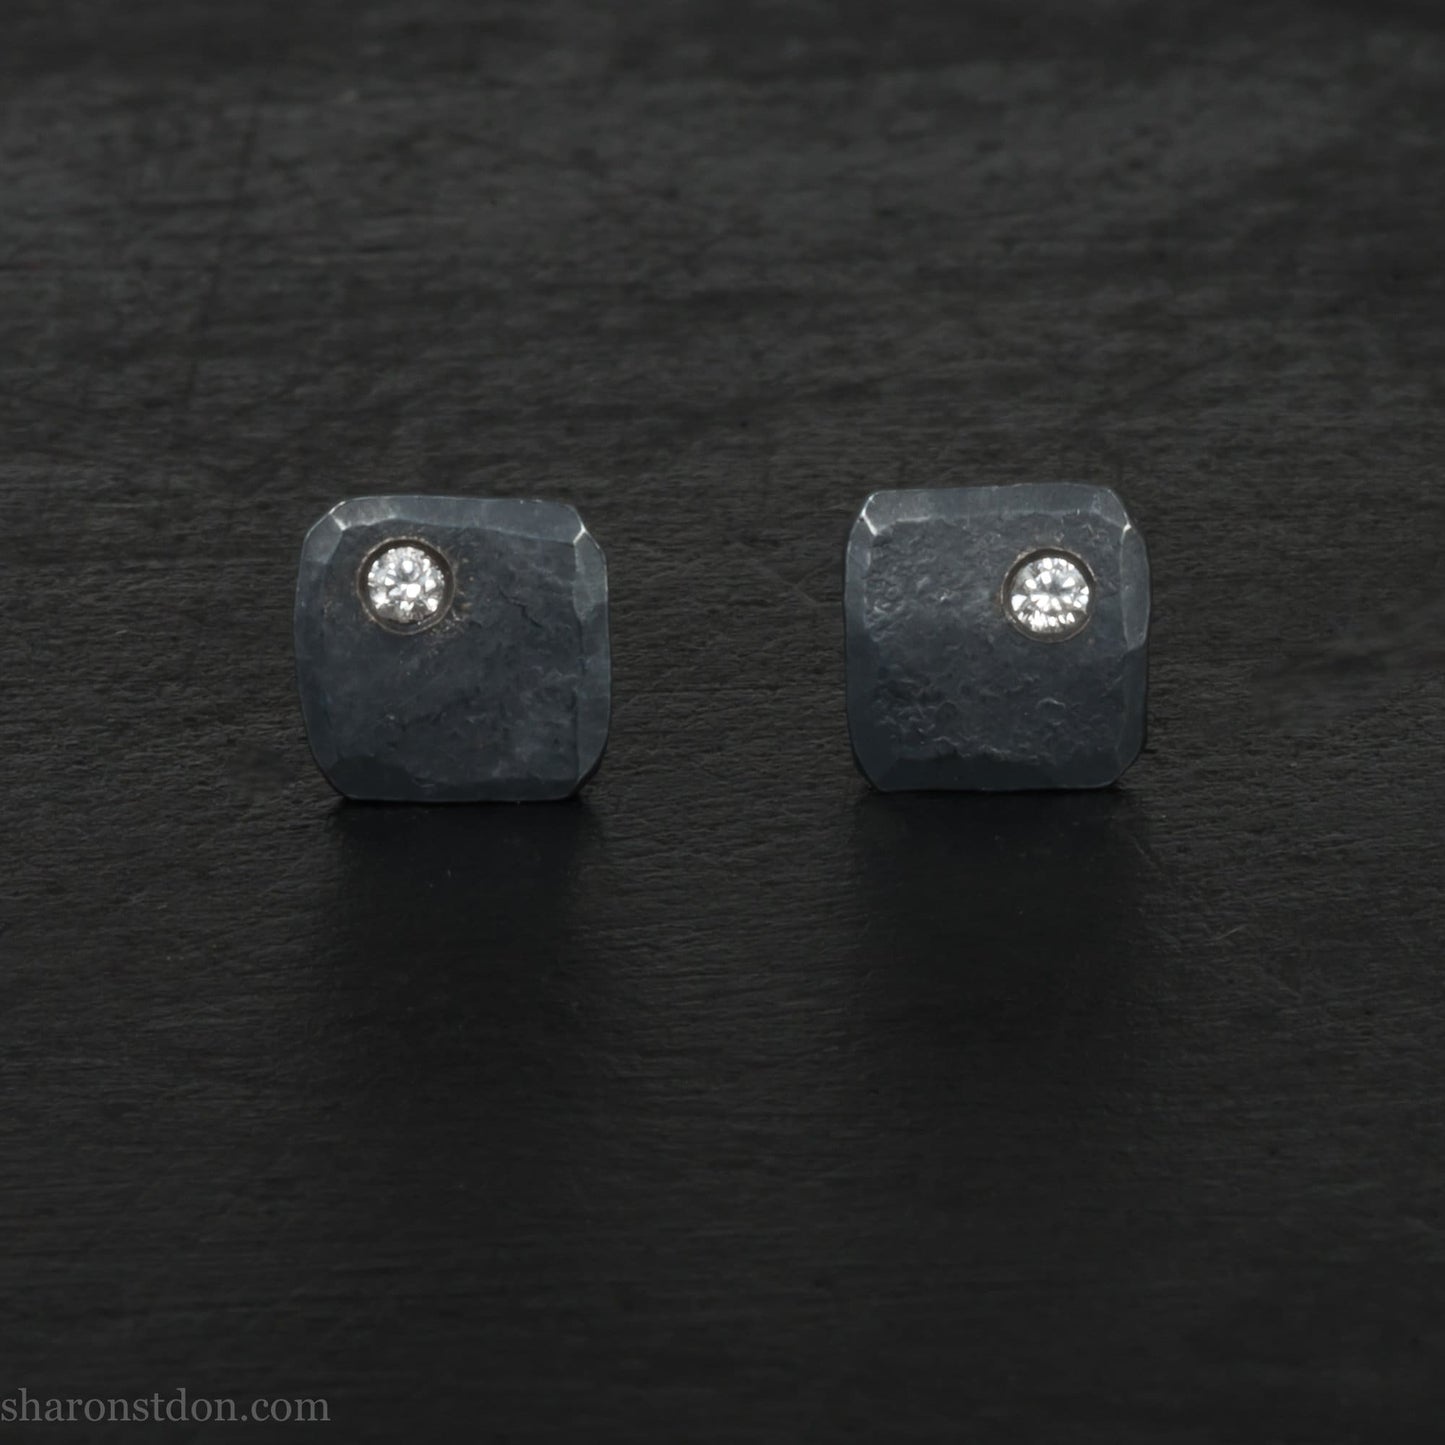 7mm x 7mm square, oxidized black, 925 sterling silver stud earrings with Canadian diamond in the corner. Handmade by Sharon SaintDon in North America with Canadamark diamonds for men or women, non binary.